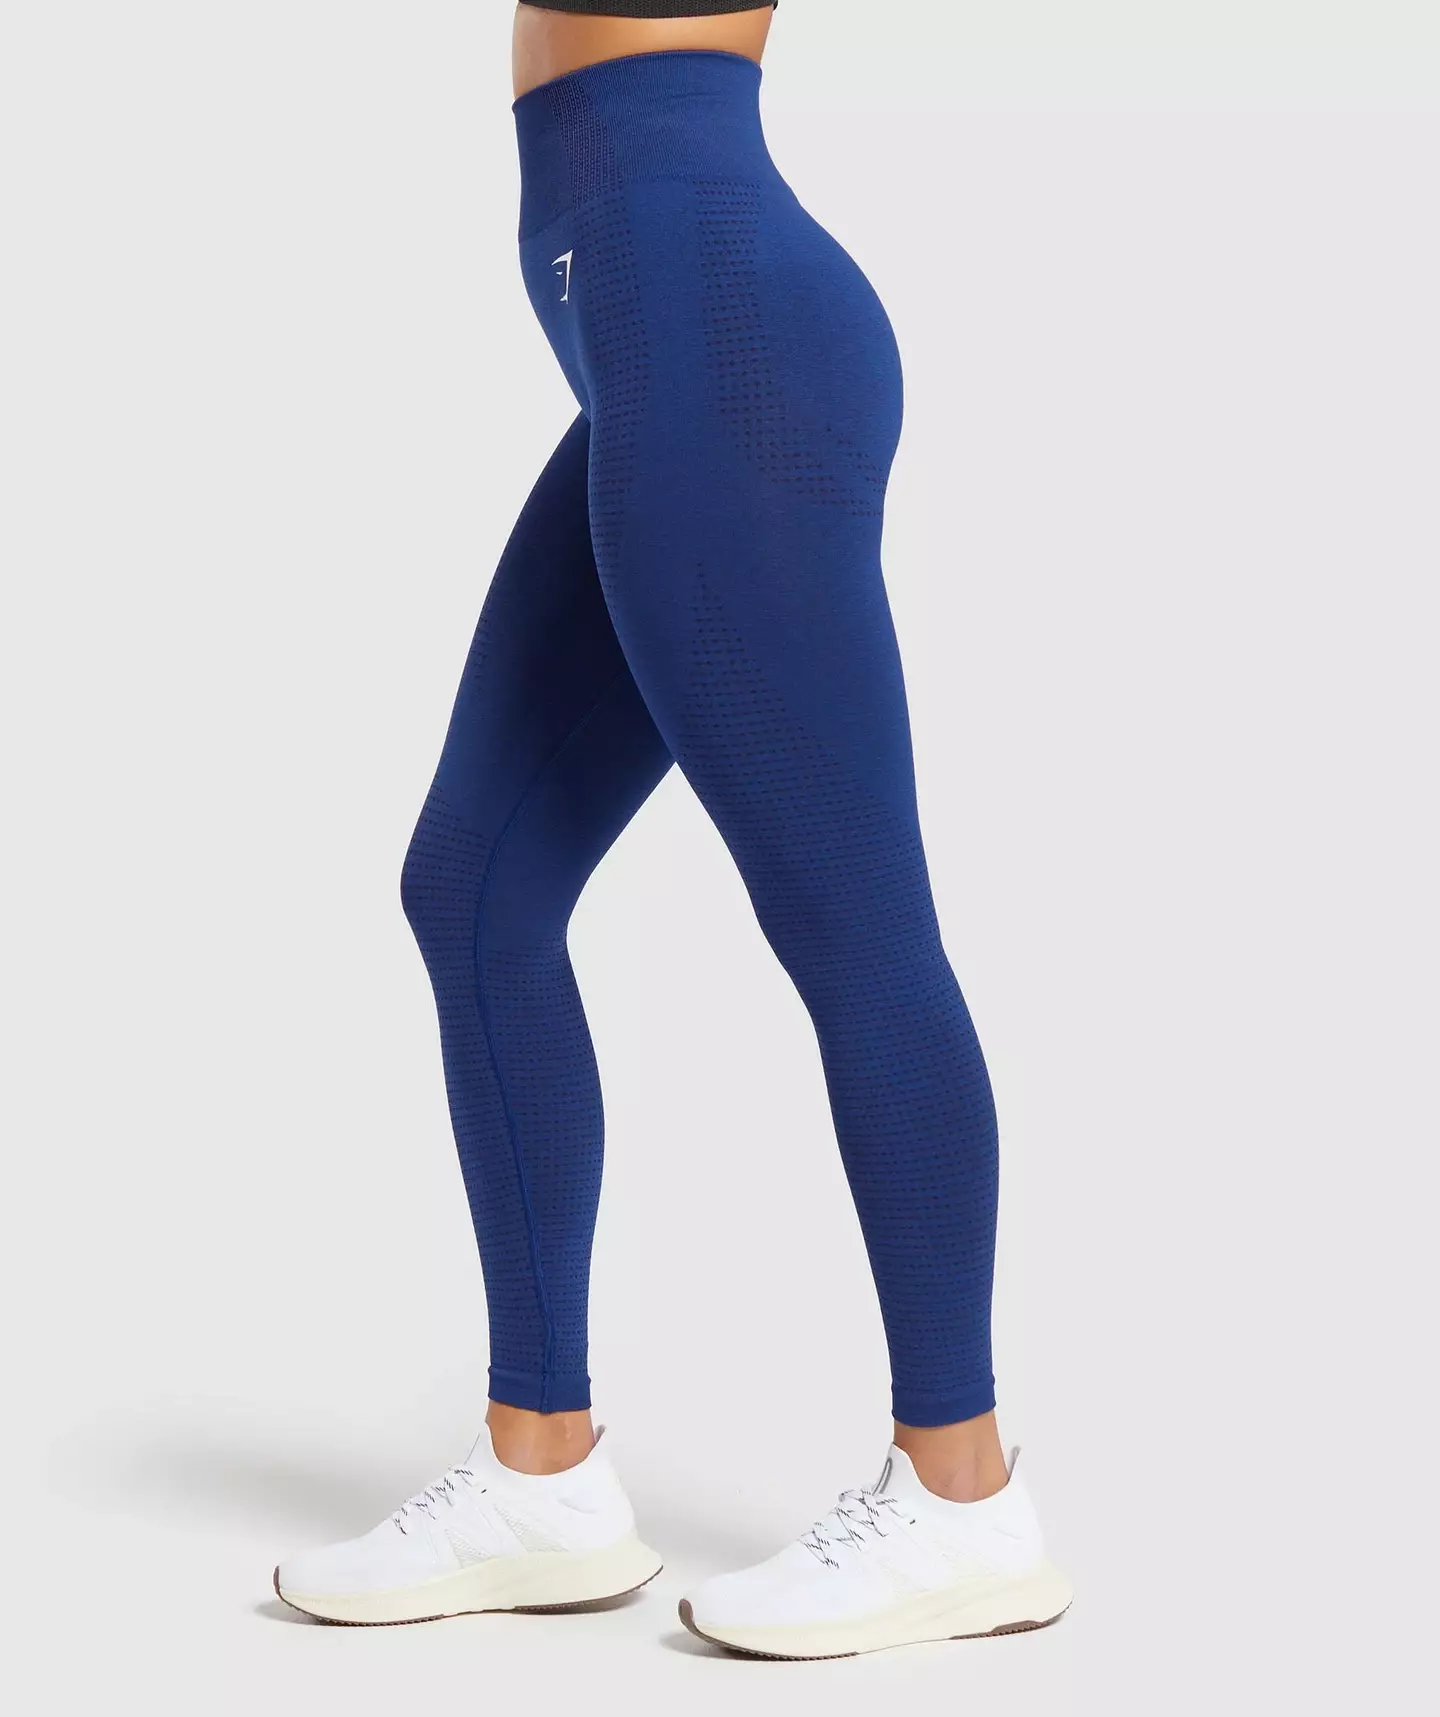 The impressive leggings are available in a range of colours.